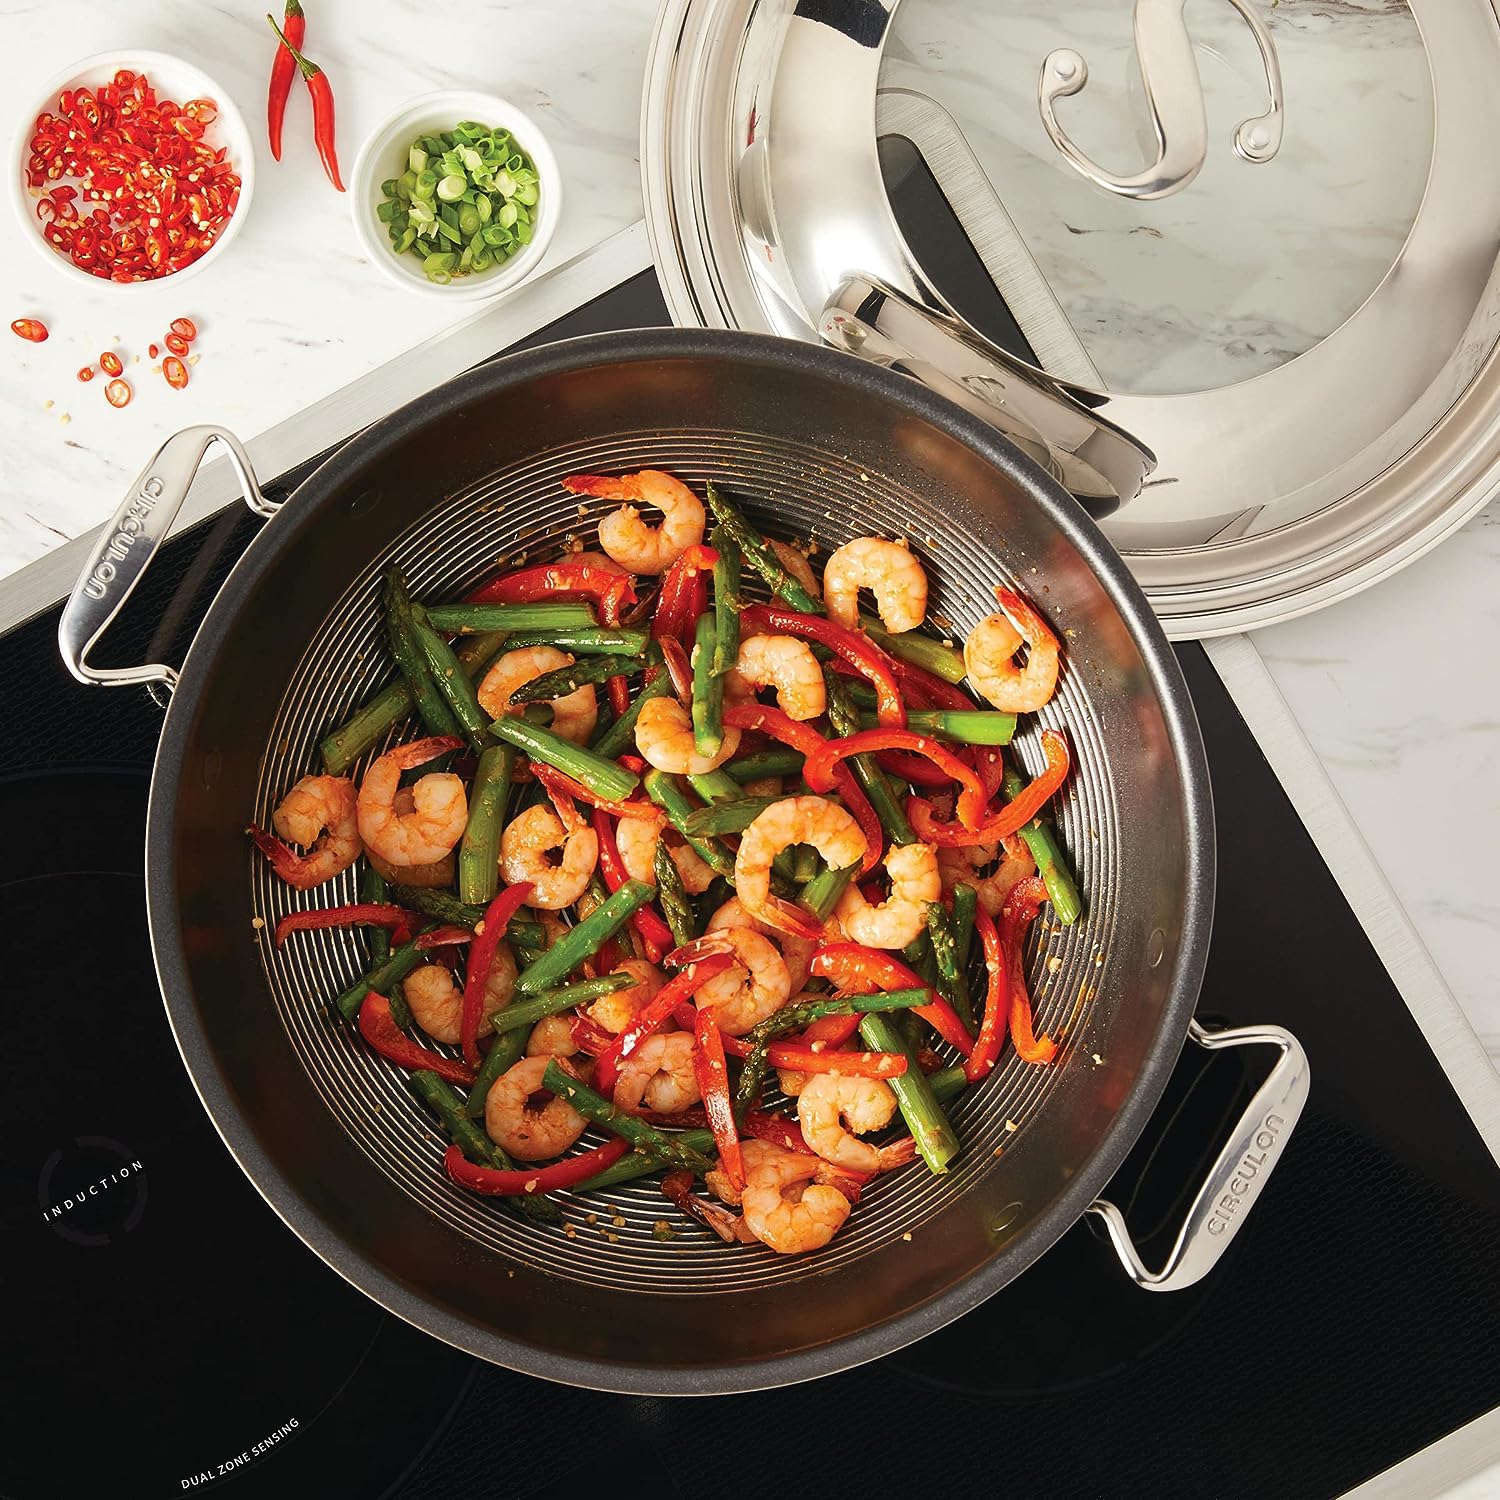 https://bigbigmart.com/wp-content/uploads/2023/09/Circulon-Clad-Stainless-Steel-Wok-Stir-Fry-with-Glass-Lid-and-Hybrid-SteelShield-and-Nonstick-Technology-14-Inch-Silver4.jpg